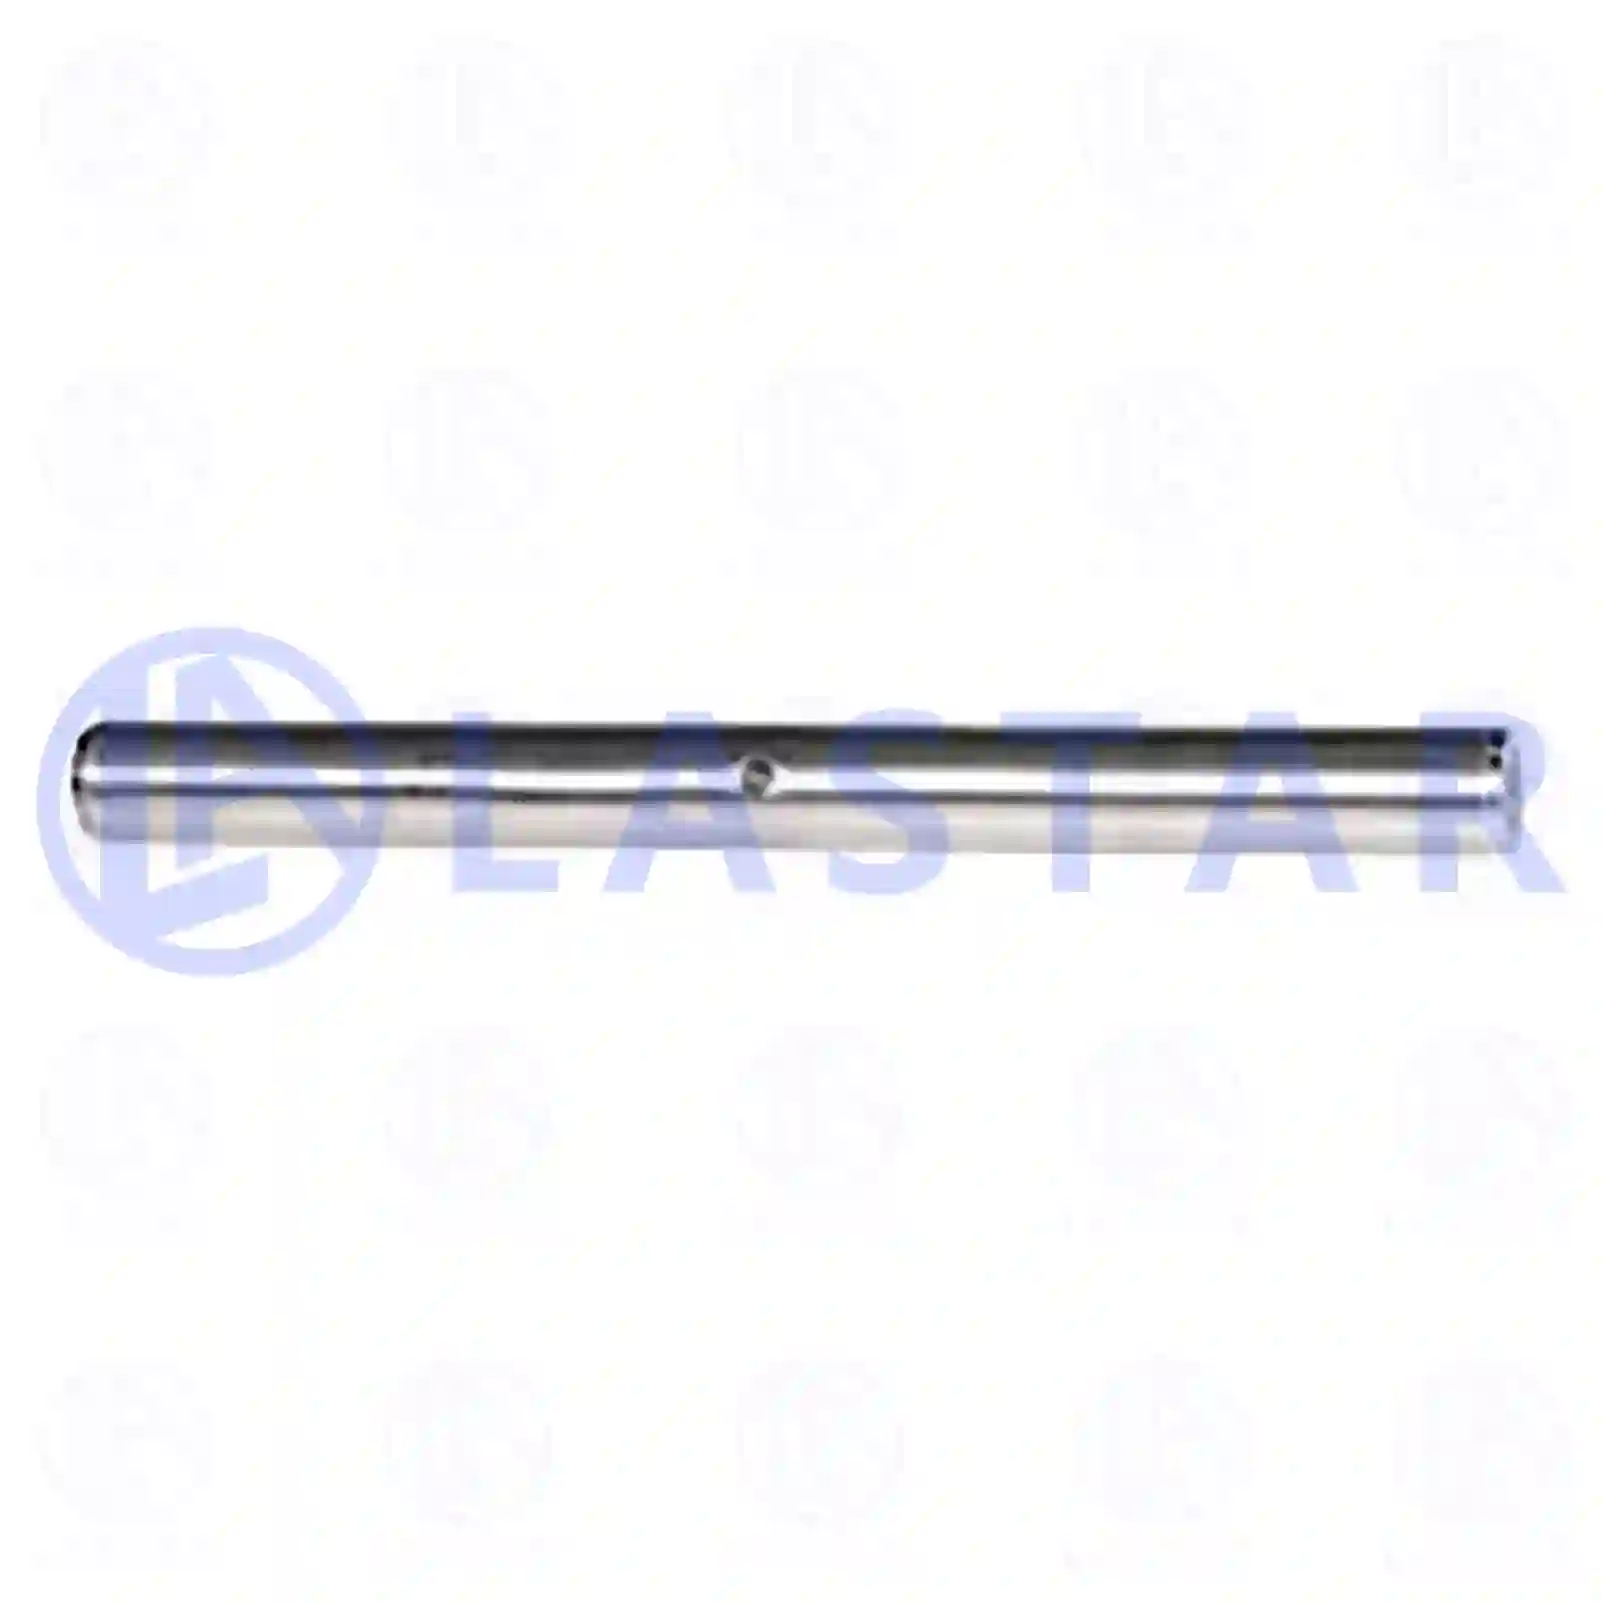 Release shaft, 77723014, 42103387, ZG30373-0008 ||  77723014 Lastar Spare Part | Truck Spare Parts, Auotomotive Spare Parts Release shaft, 77723014, 42103387, ZG30373-0008 ||  77723014 Lastar Spare Part | Truck Spare Parts, Auotomotive Spare Parts